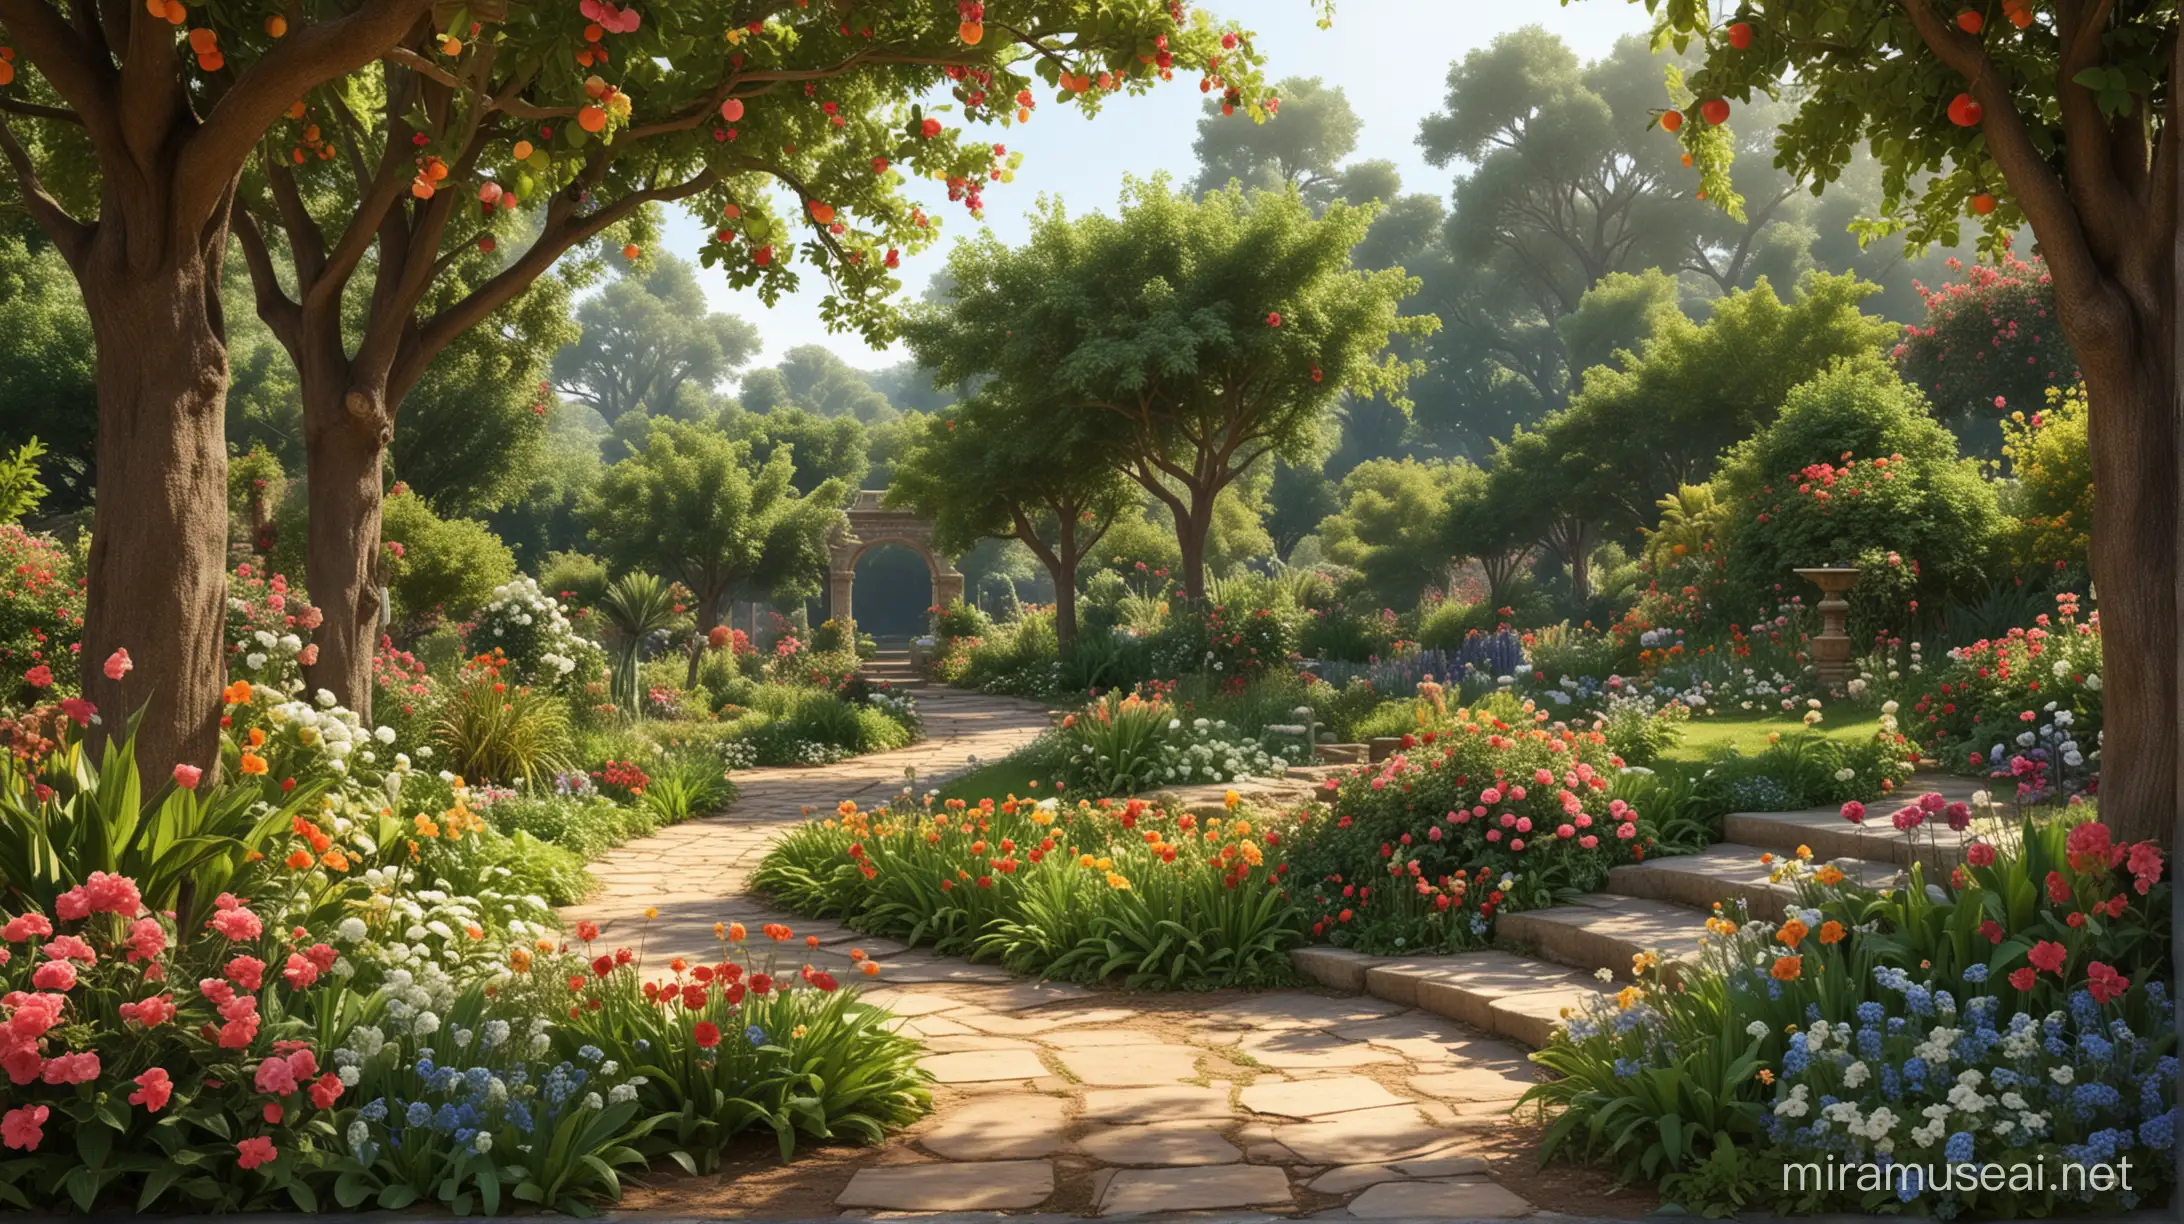 A tranquil and idyllic garden of Eden as described in the Bible, with plenty of fruits and blooming flowers and many 